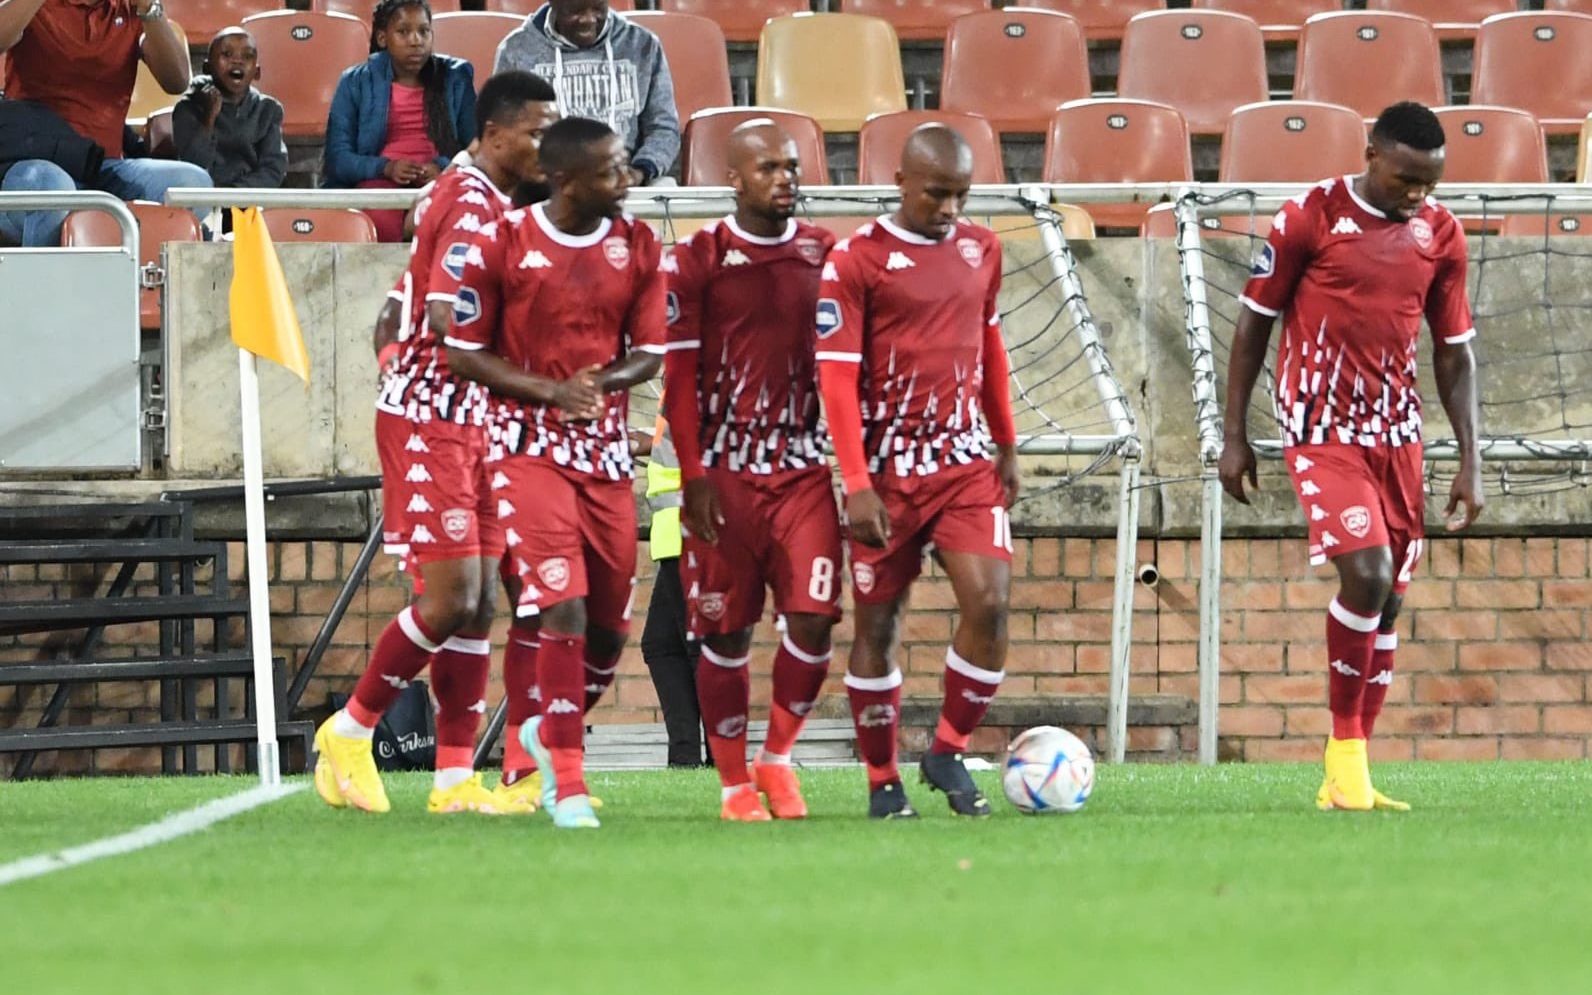 Truter says Sekhukhune are totally different now